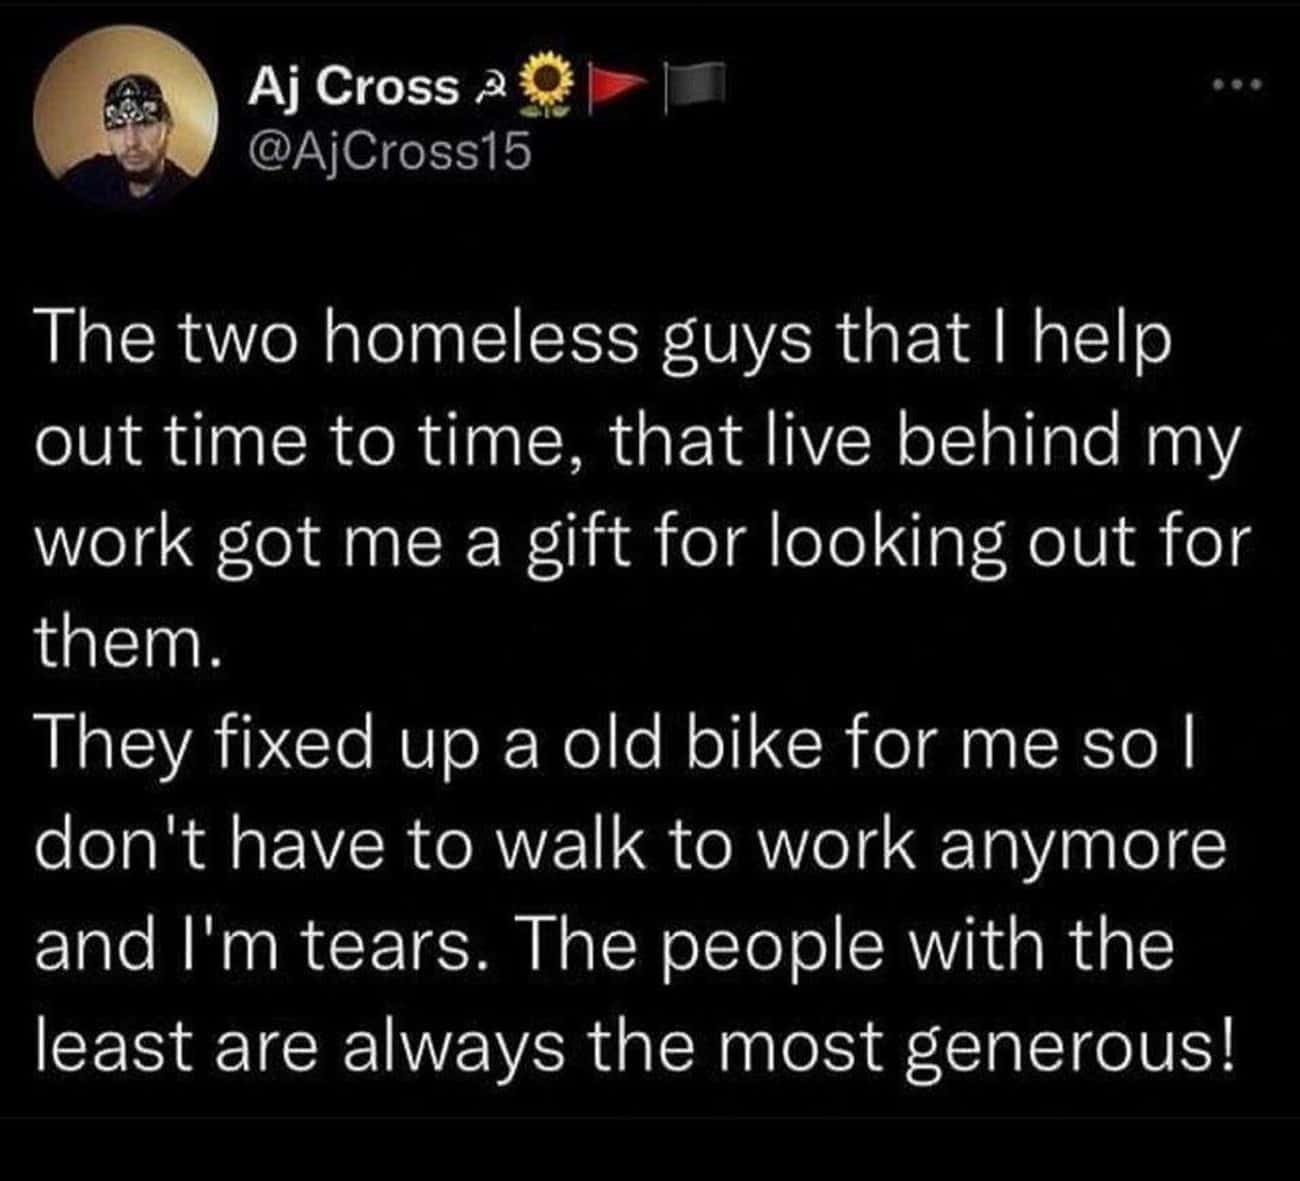 Generosity Often Comes From Those That Have The Least